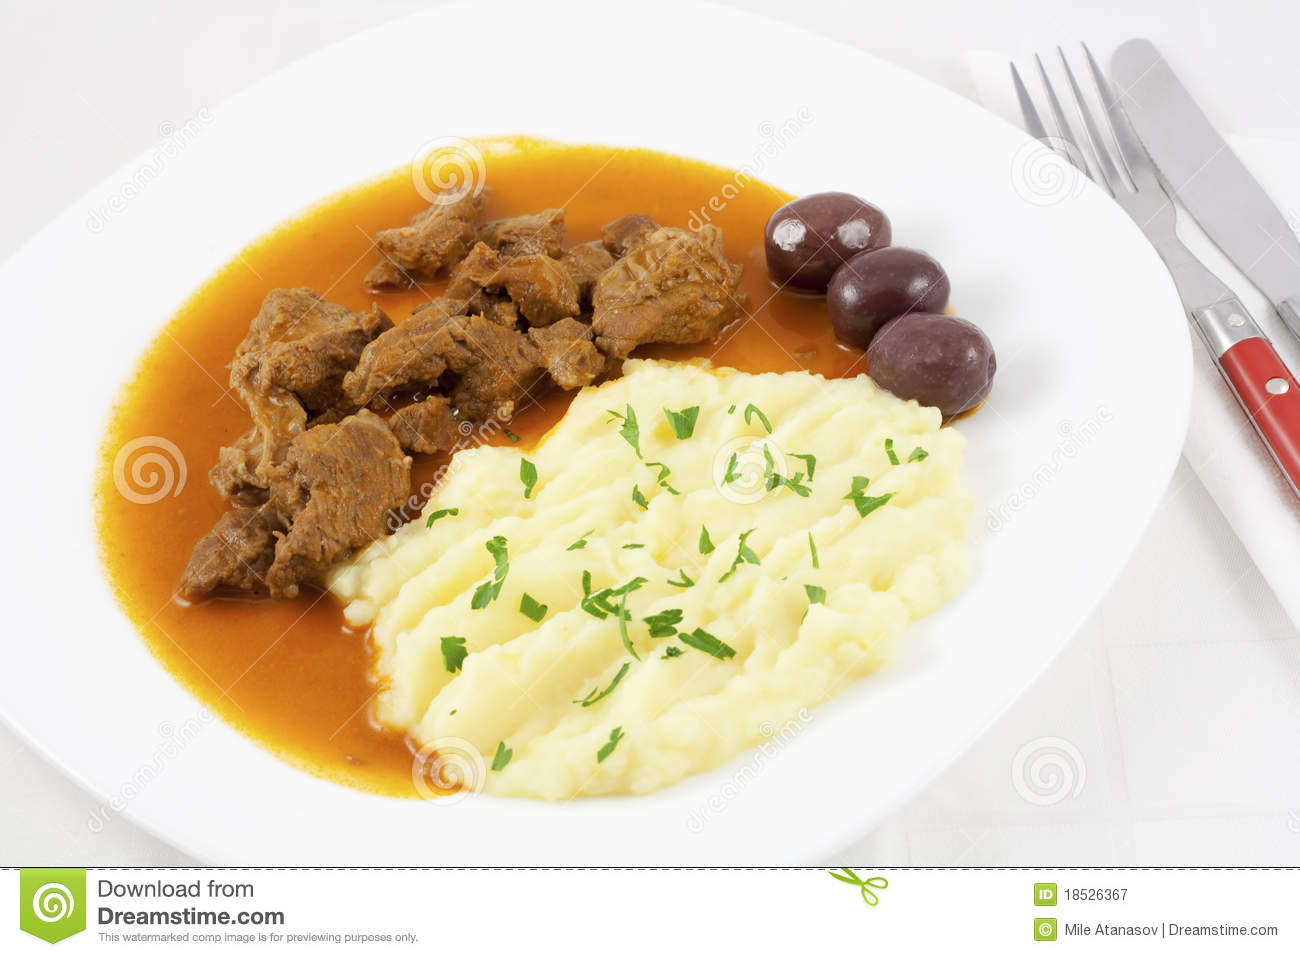 Beef Goulash With Mashed Potato Spiced With Parsley And Three Brown